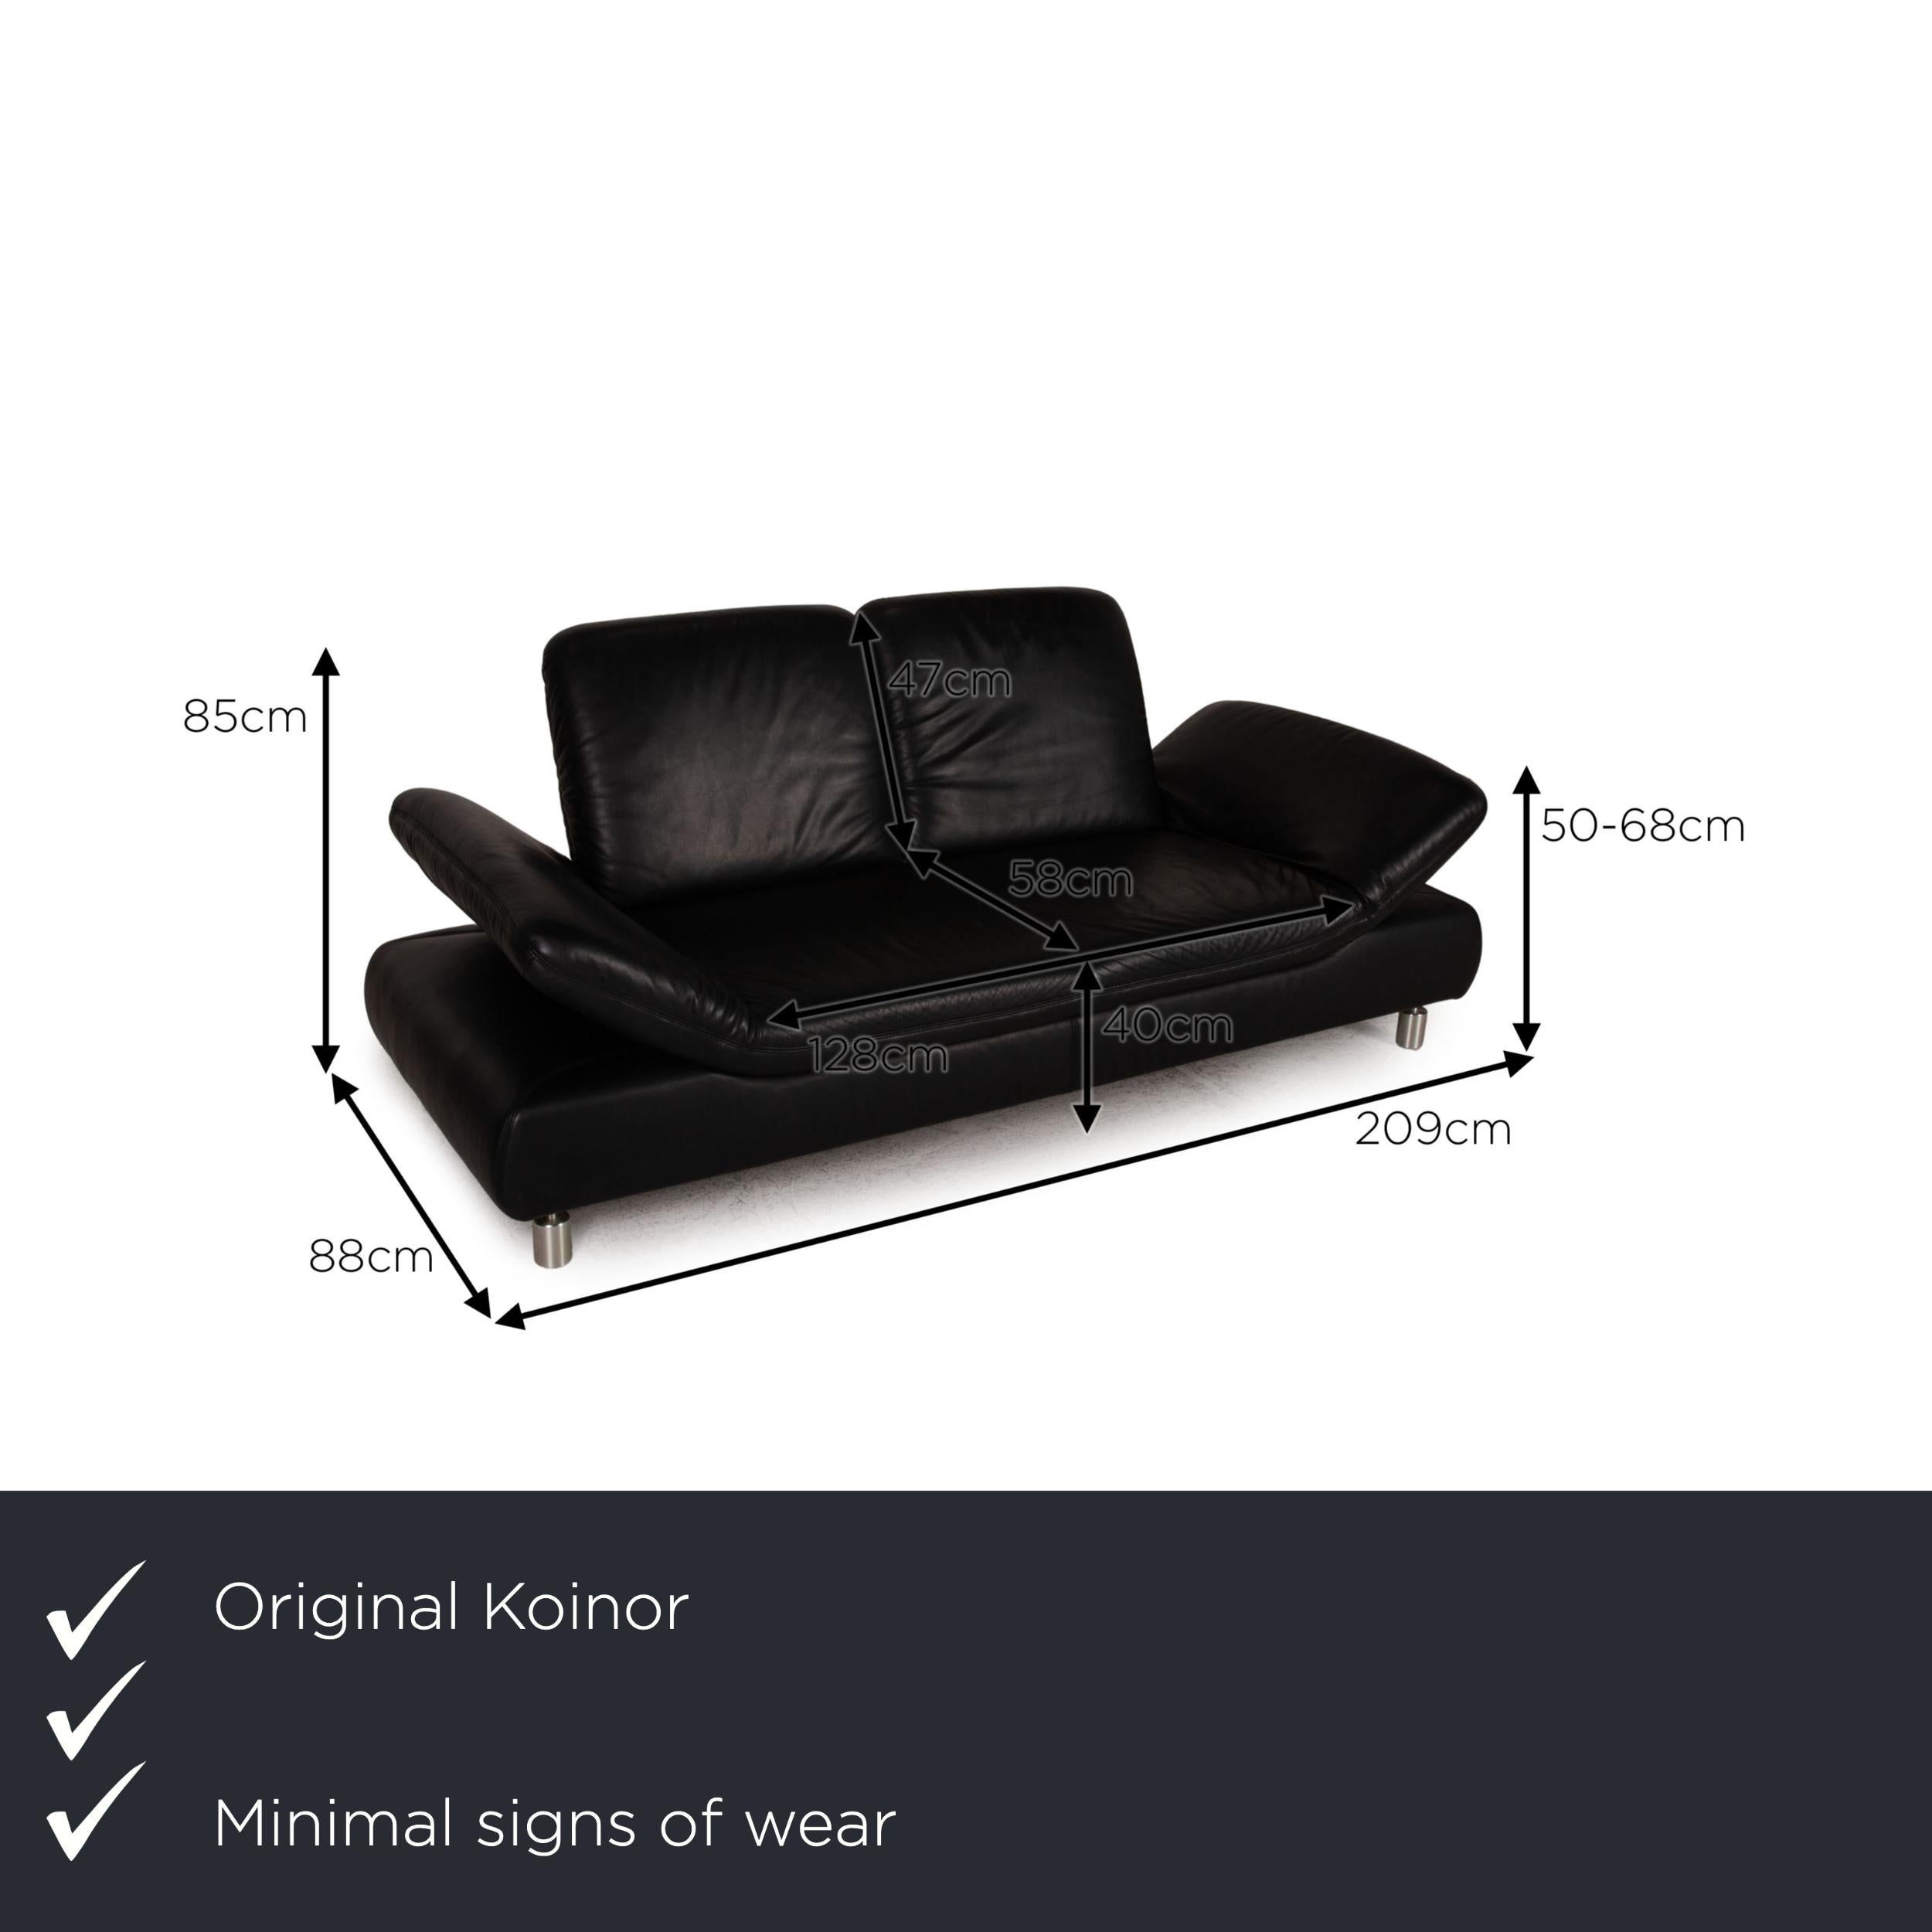 We present to you a Koinor Rivoli leather sofa black two-seater couch function.

Product measurements in centimeters:

Measure: depth: 88
width: 209
height: 85
seat height: 40
rest height: 50
seat depth: 58
seat width: 128
back height: